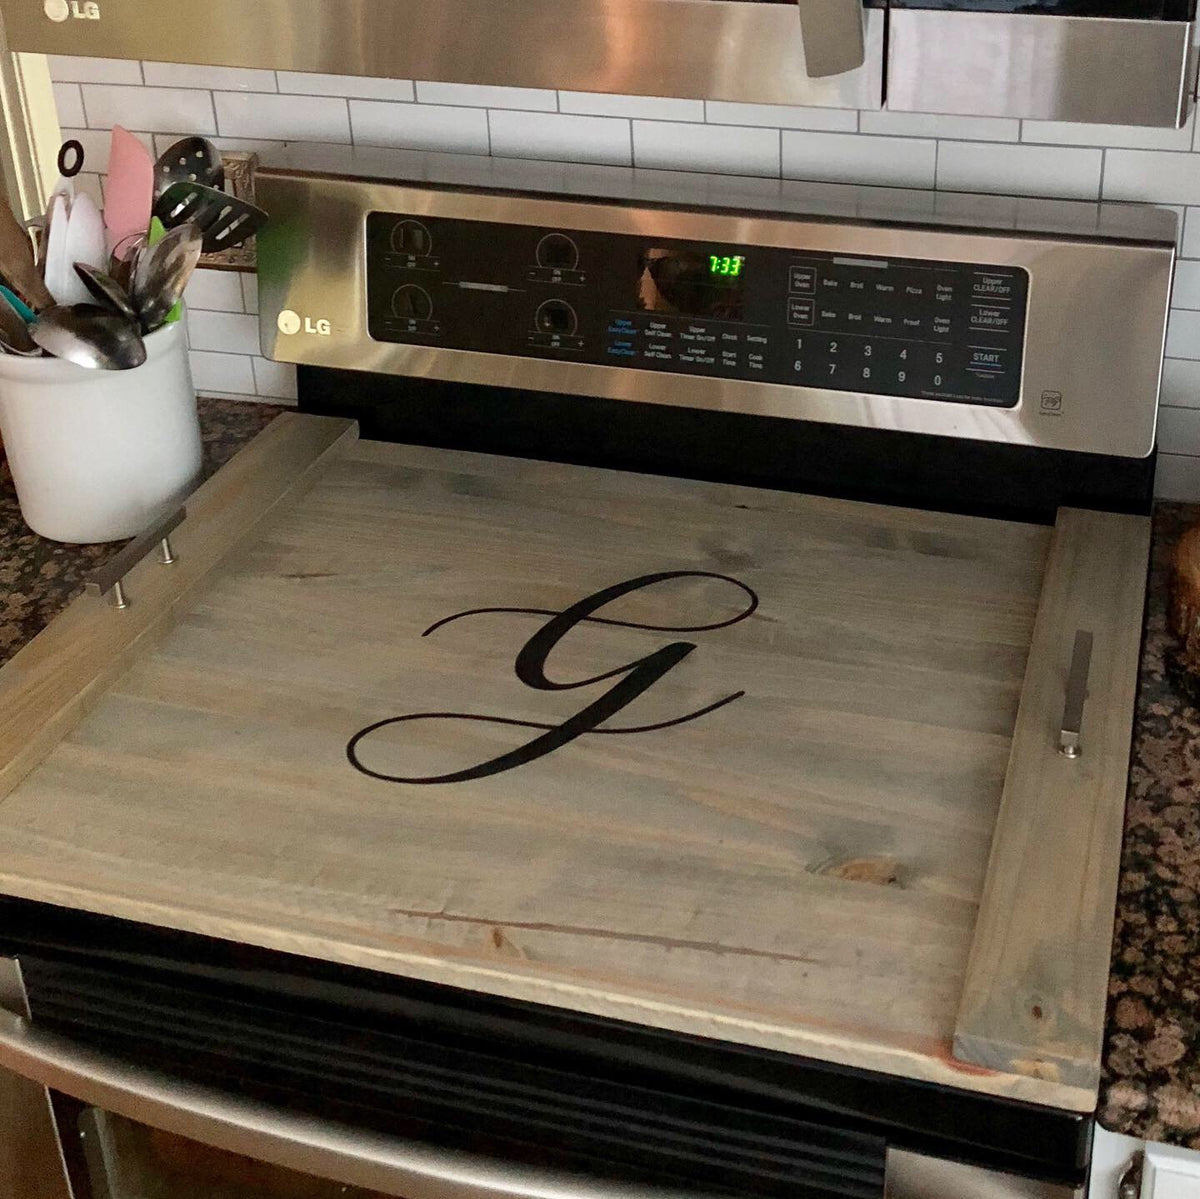 DIY Monogrammed Wooden Stovetop Cover And Tray - Ideas for the Home